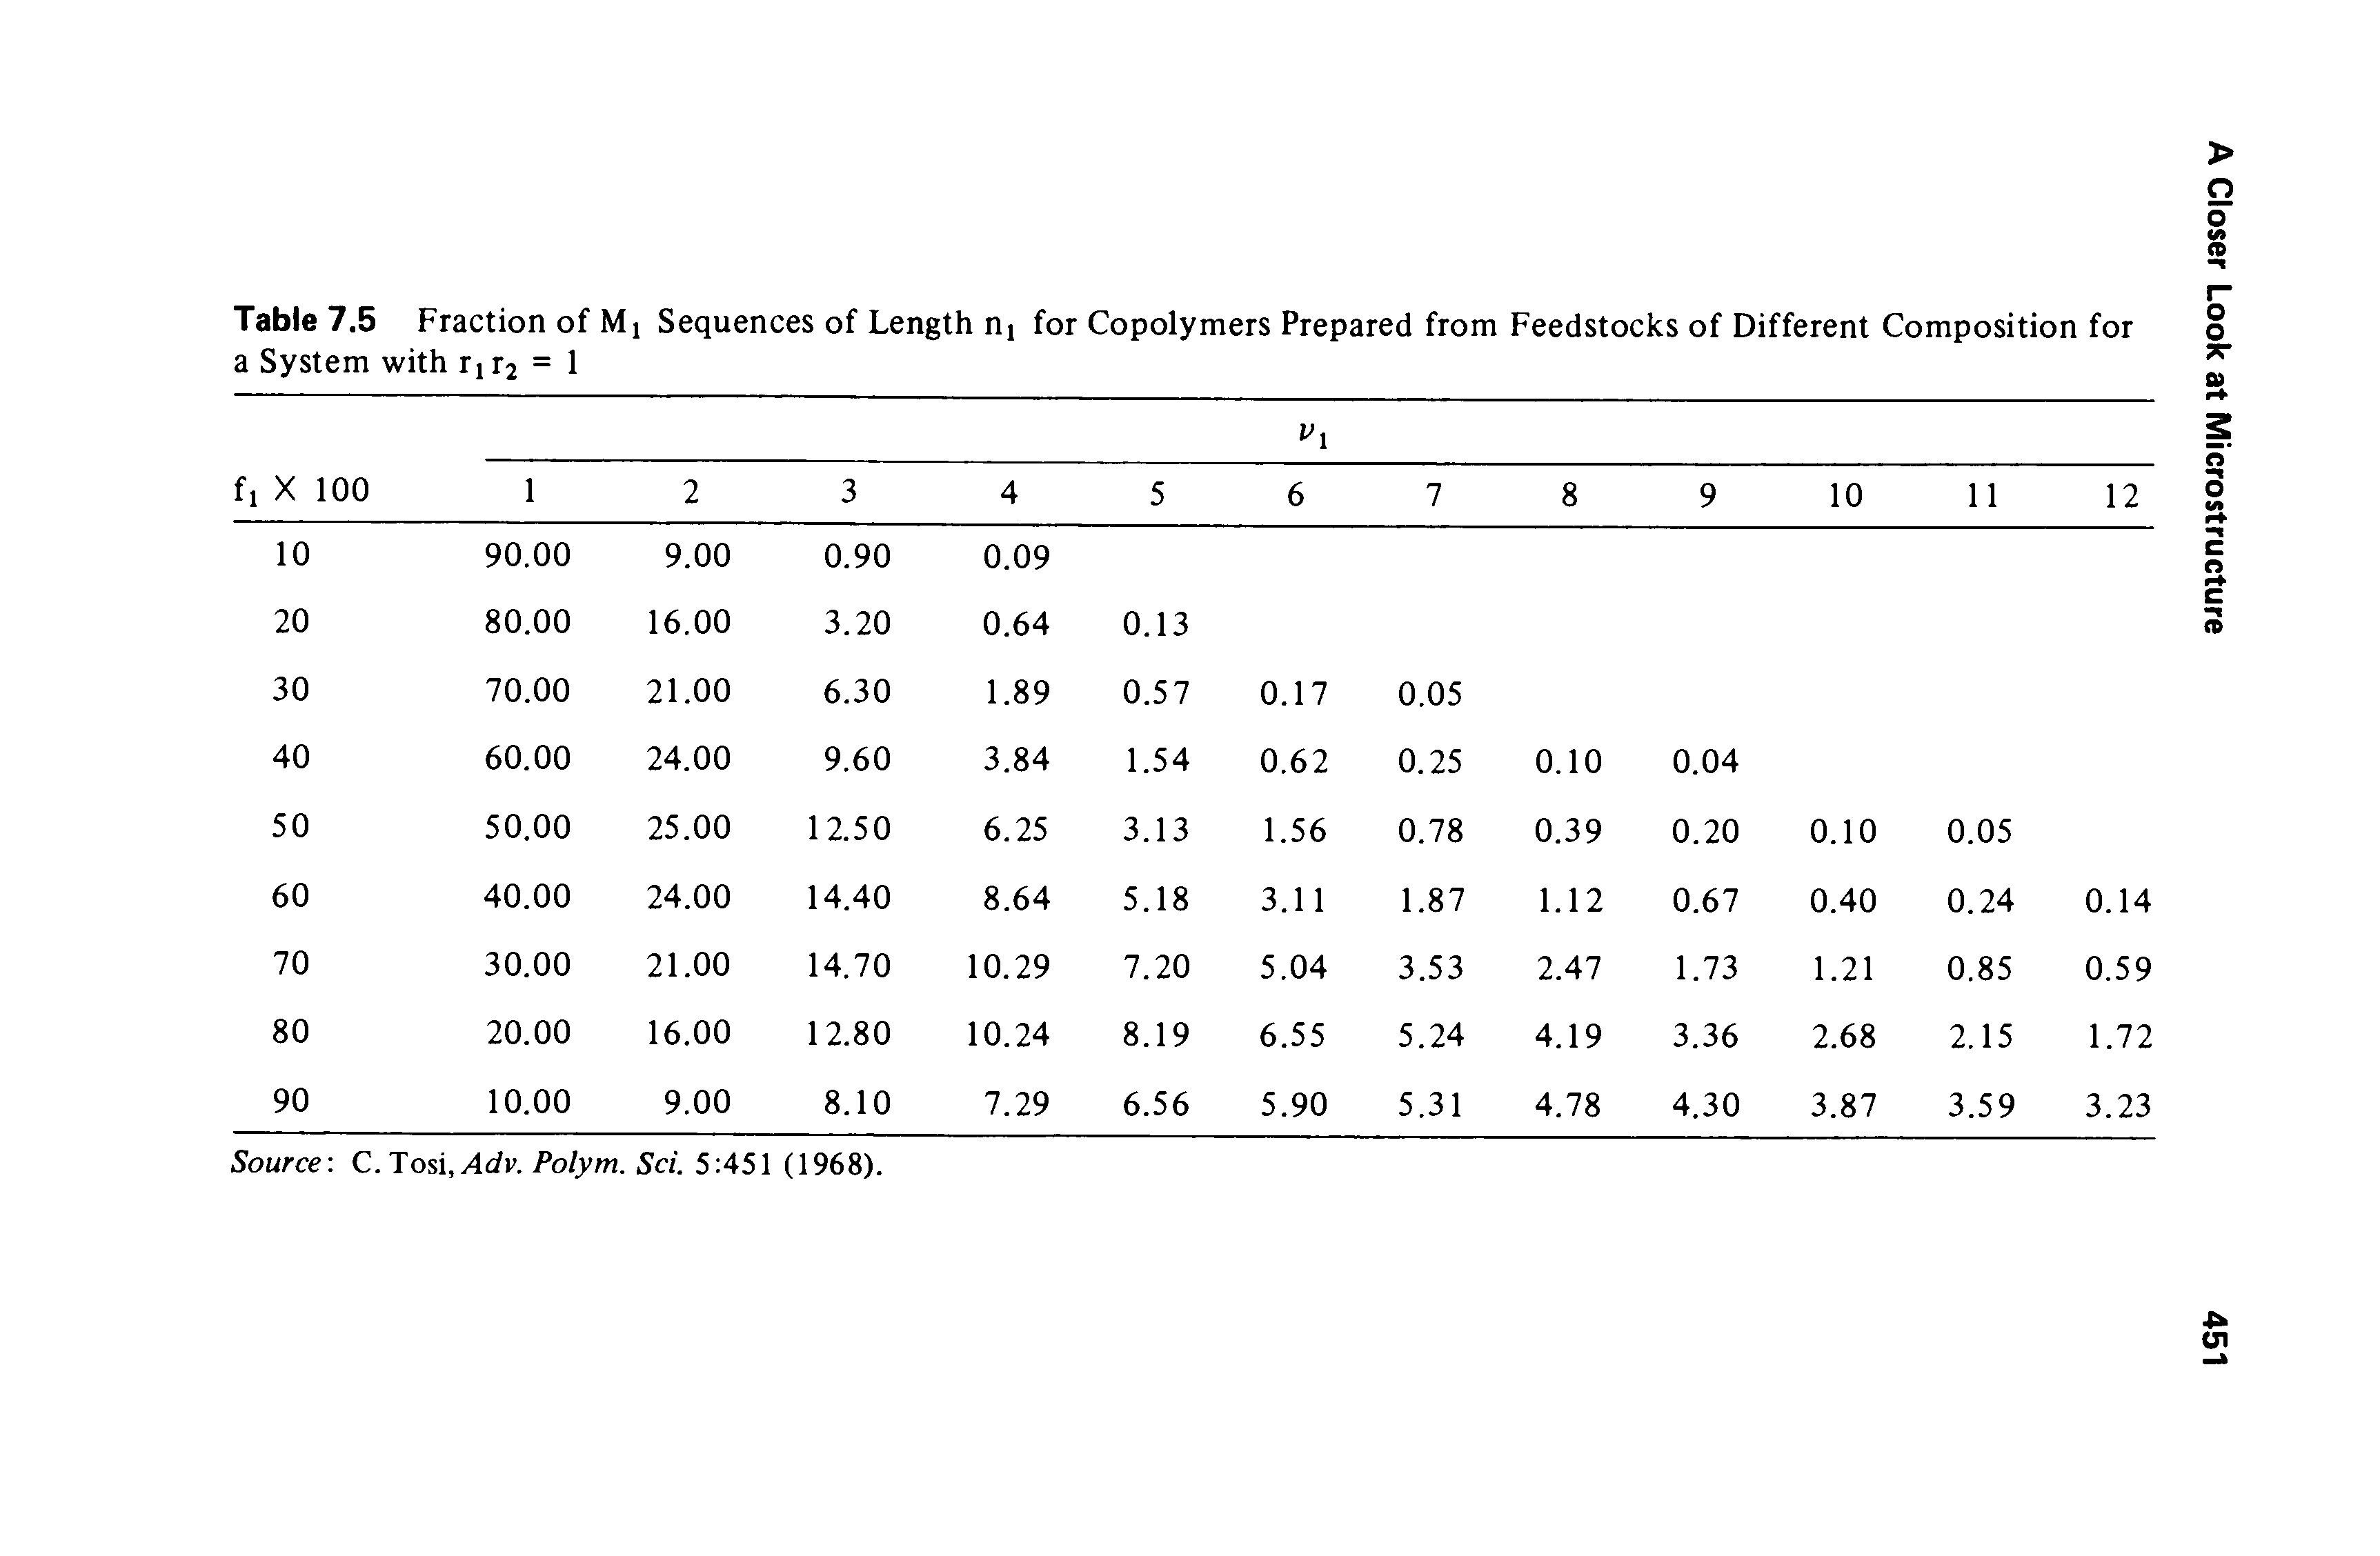 Table 7.5 Fraction of Mj Sequences of Length nj for Copolymers Prepared from Feedstocks of Different Composition for a System with rjr2 = 1...